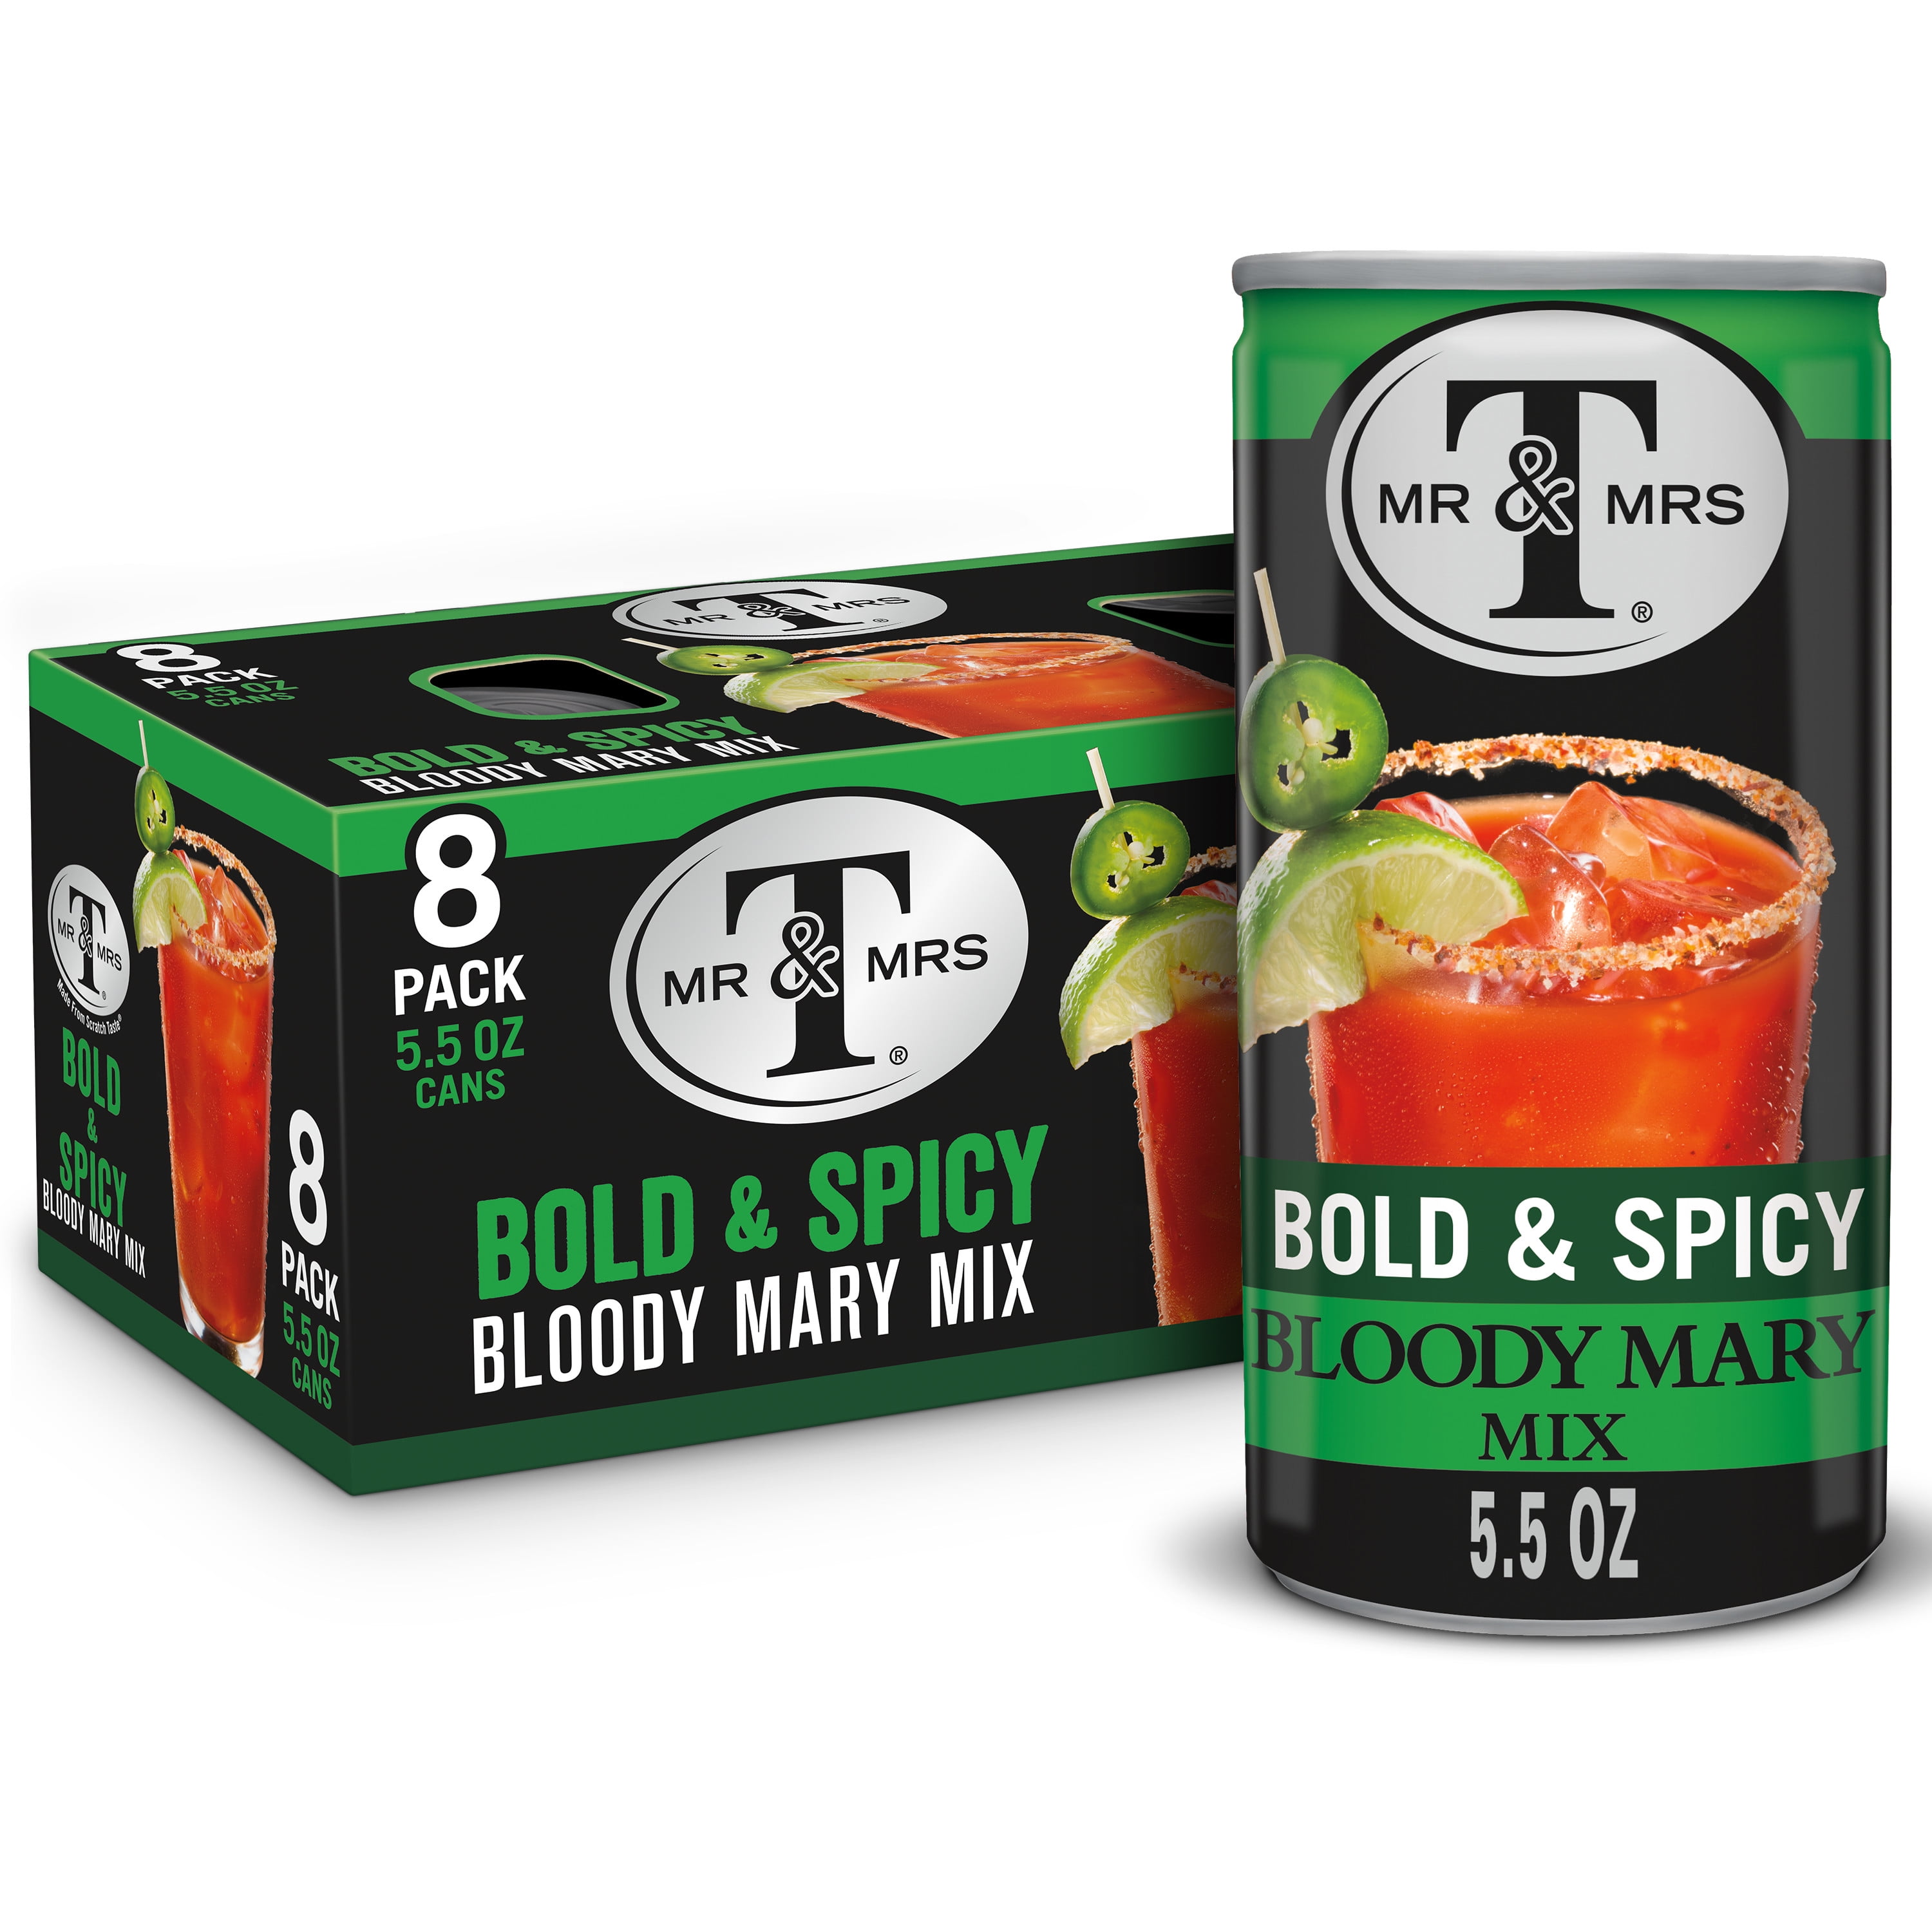 Mr & Mrs T Bold Spicy Bloody Mary Mix, 5.5 fl oz, 8 Pack Cans - Walmart.com